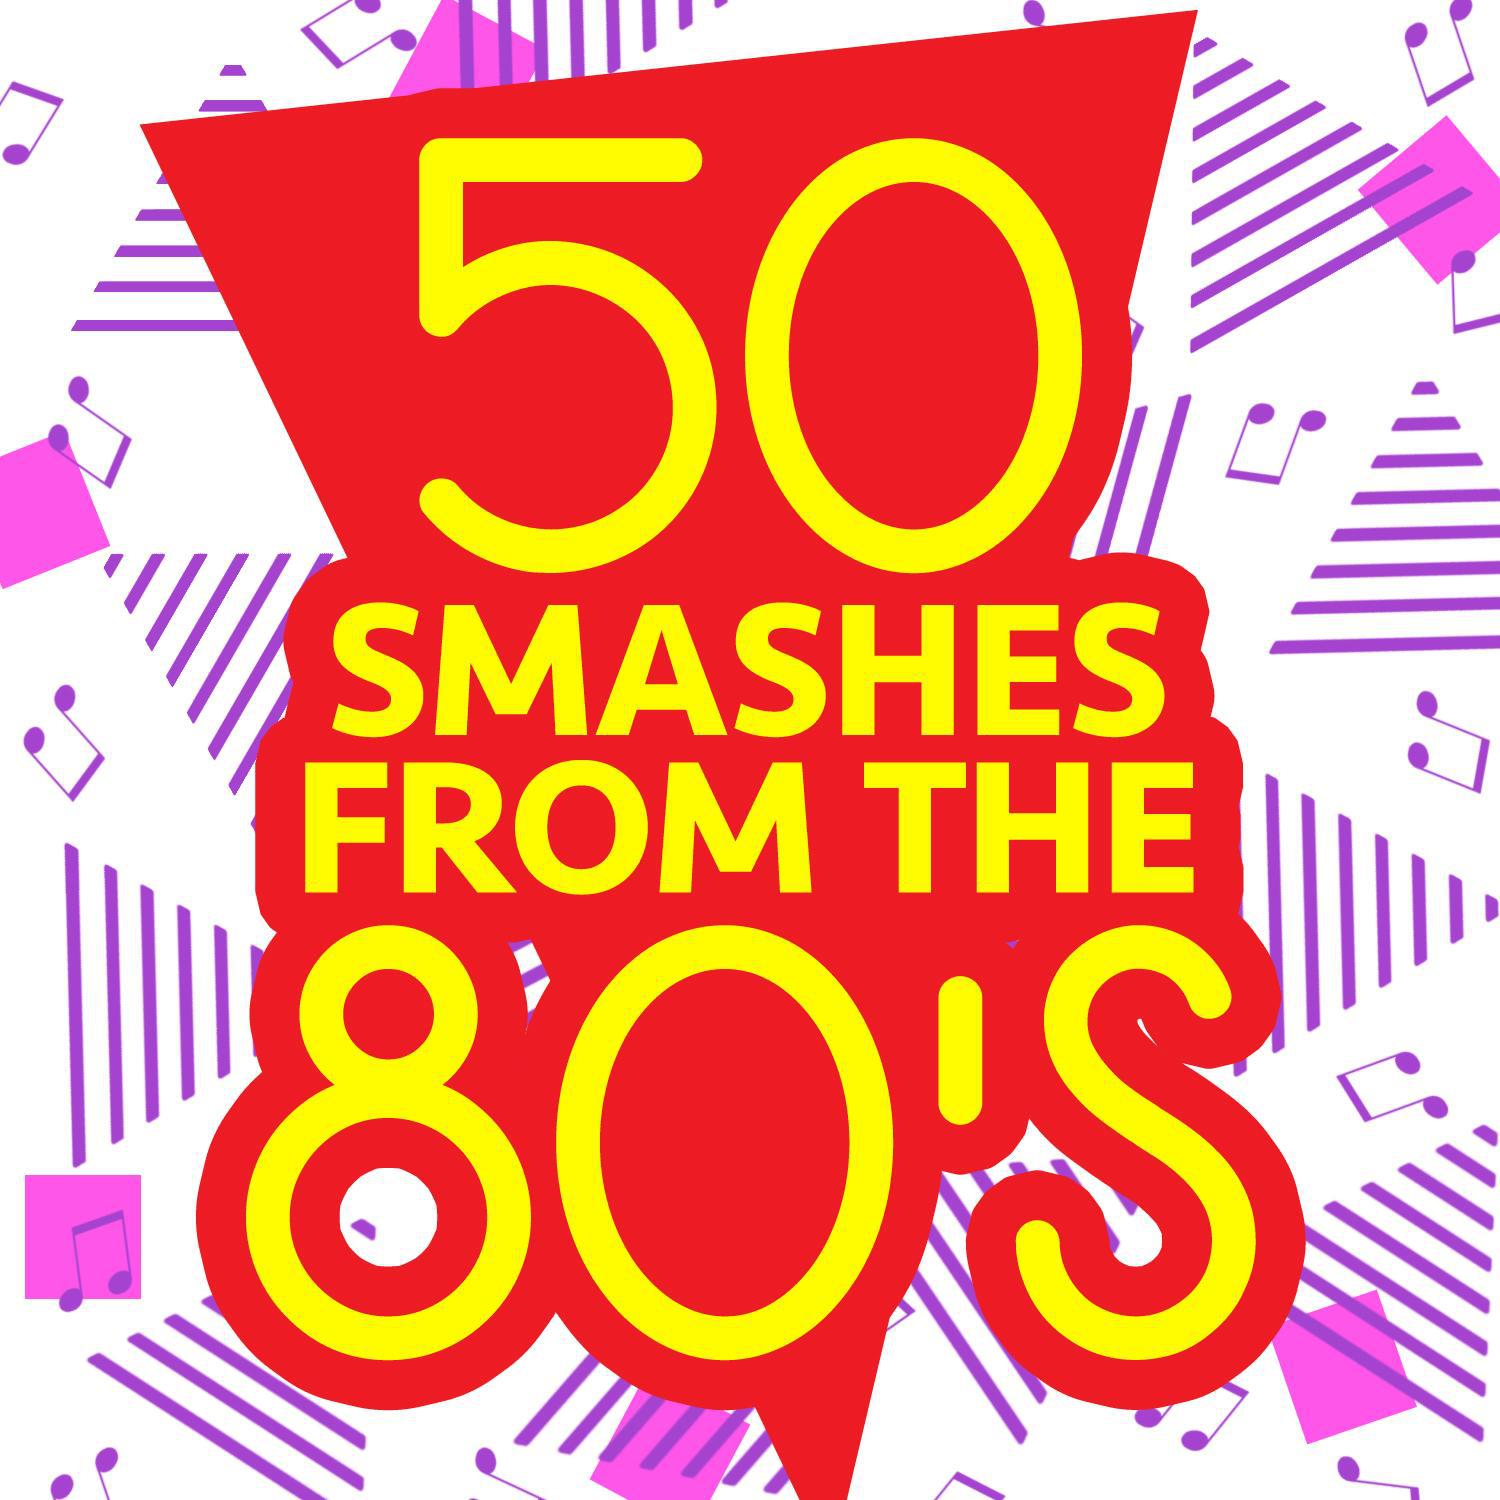 50 Smashes from the 80's